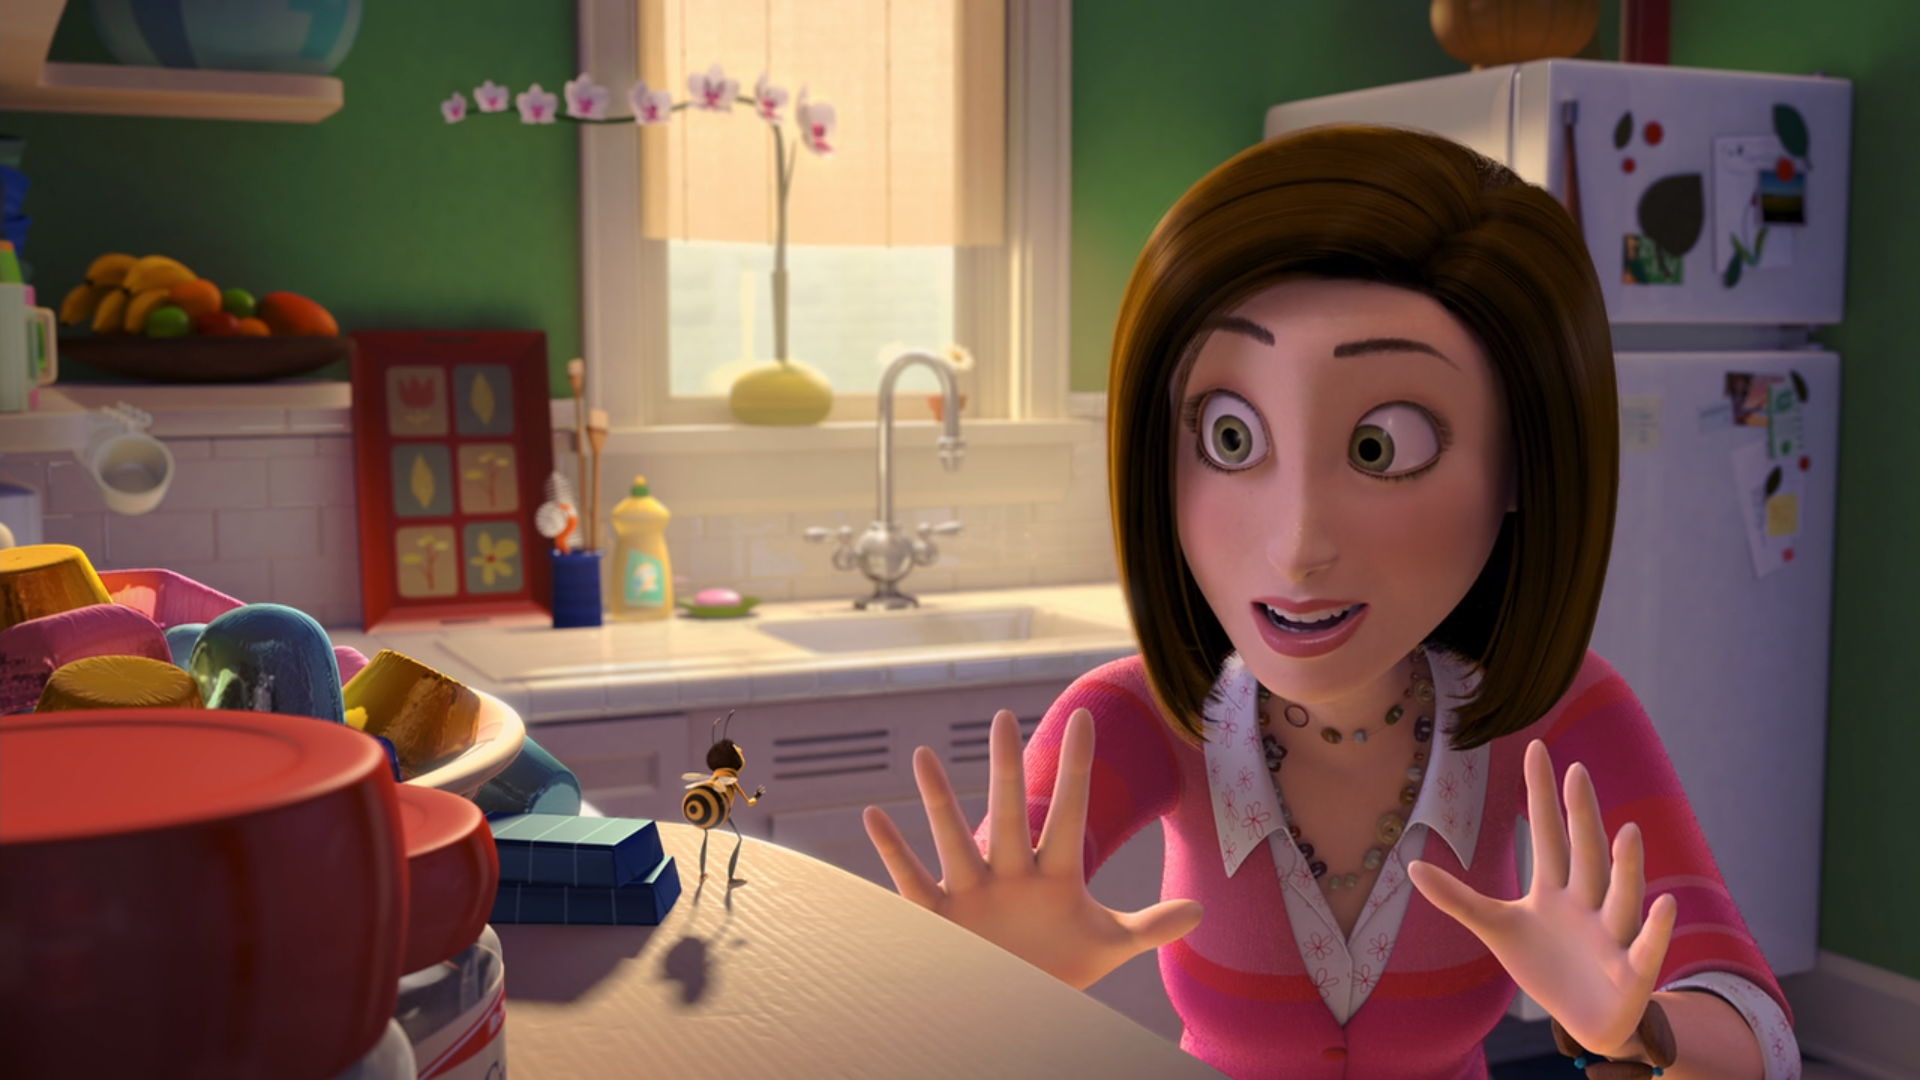 a woman dressed in a pink sweater talks to a bee standing on a kitchen counter